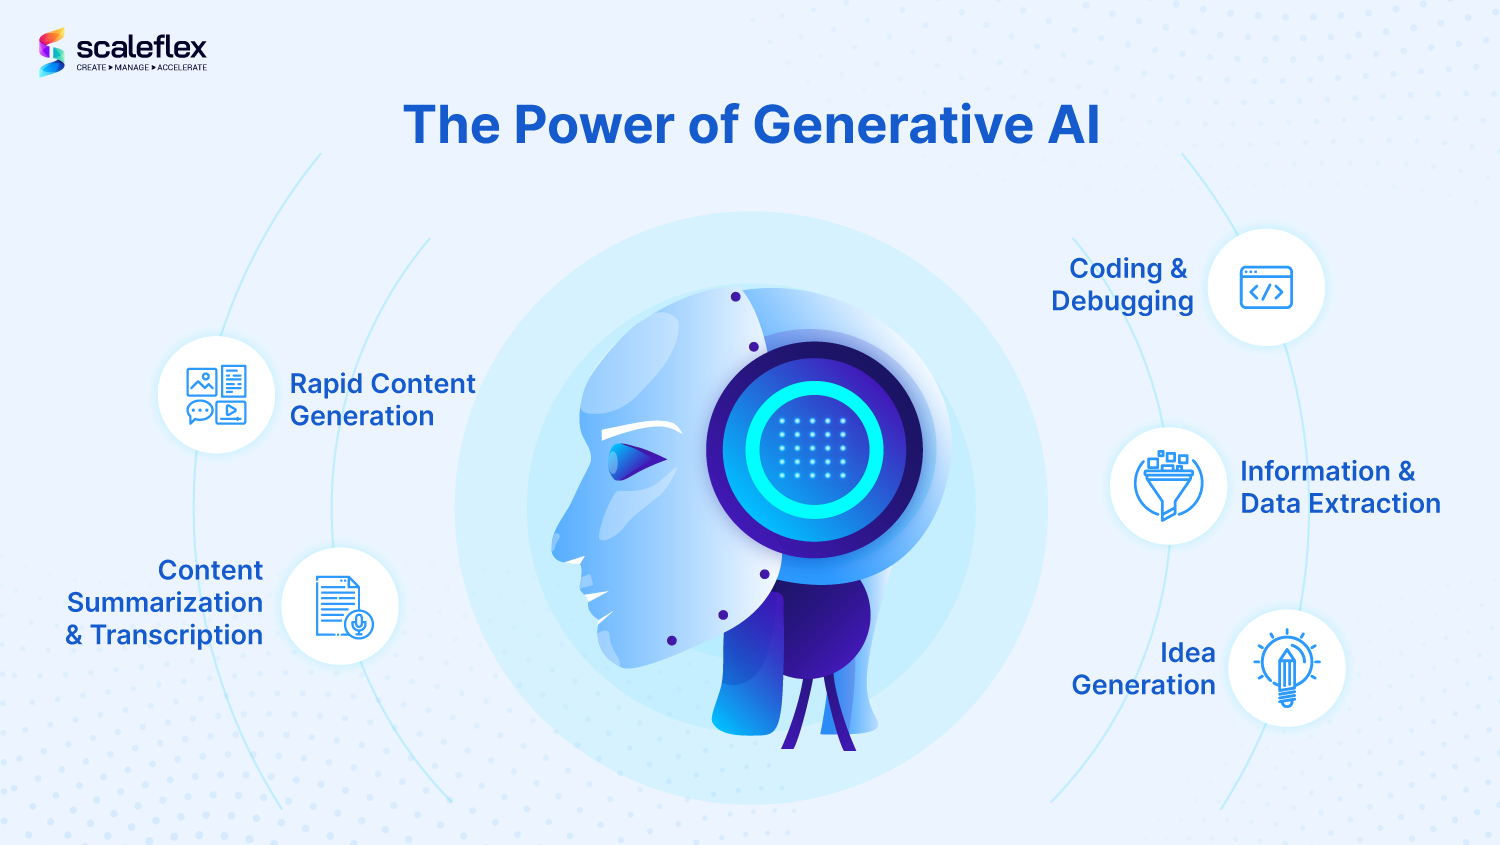 The power of generative AI